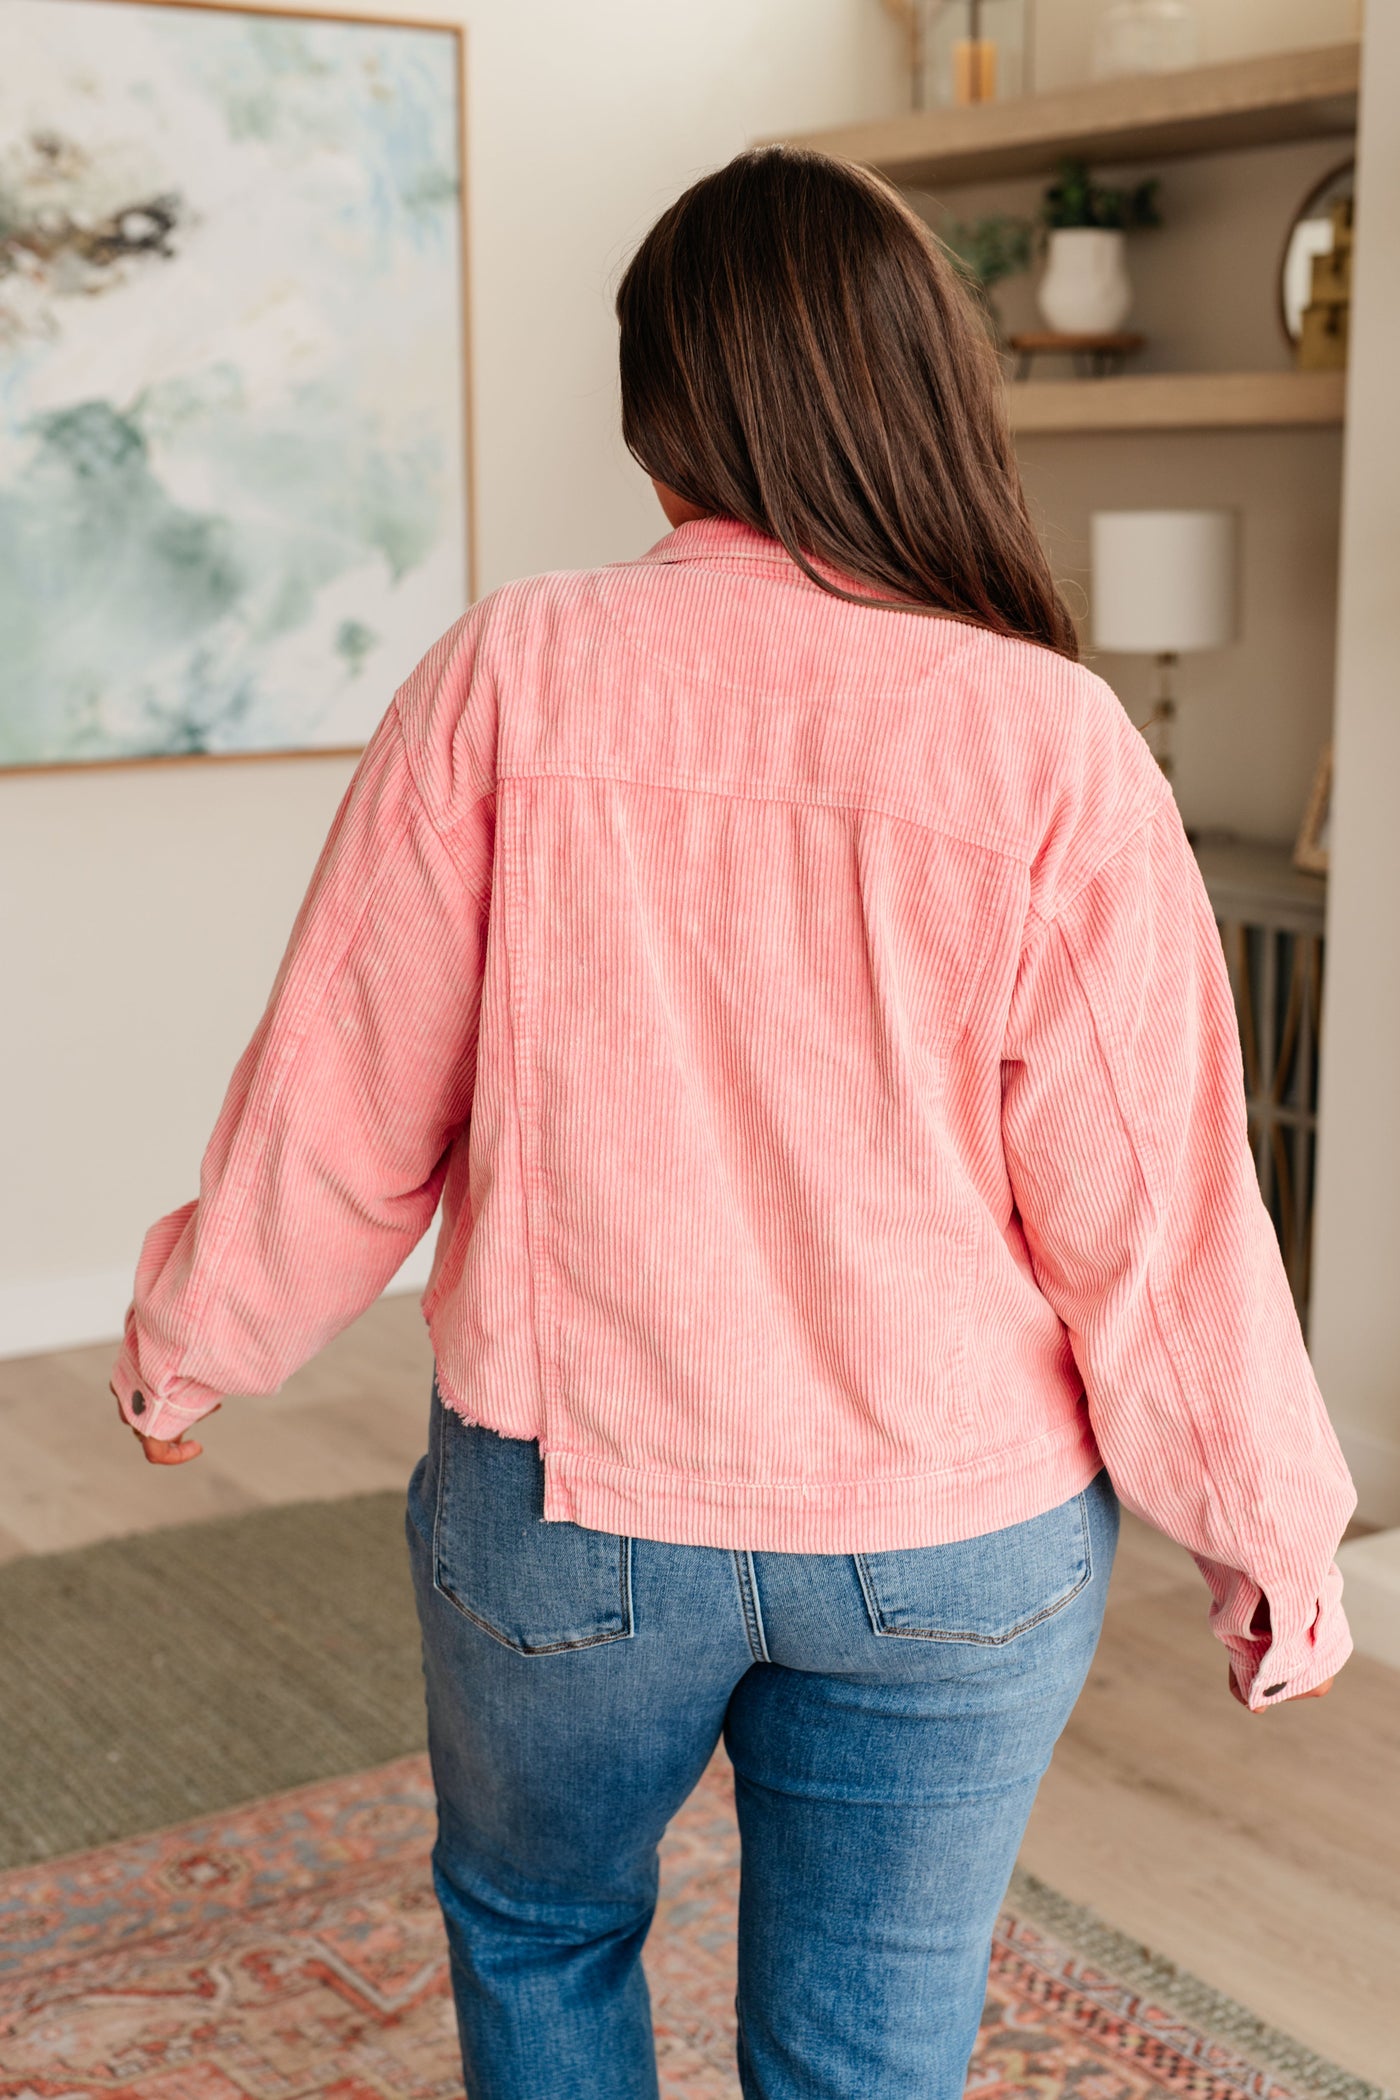 Main Stage Corduroy Jacket in Neon Pink-Layers-Ave Shops-Market Street Nest, Fashionable Clothing, Shoes and Home Décor Located in Mabank, TX